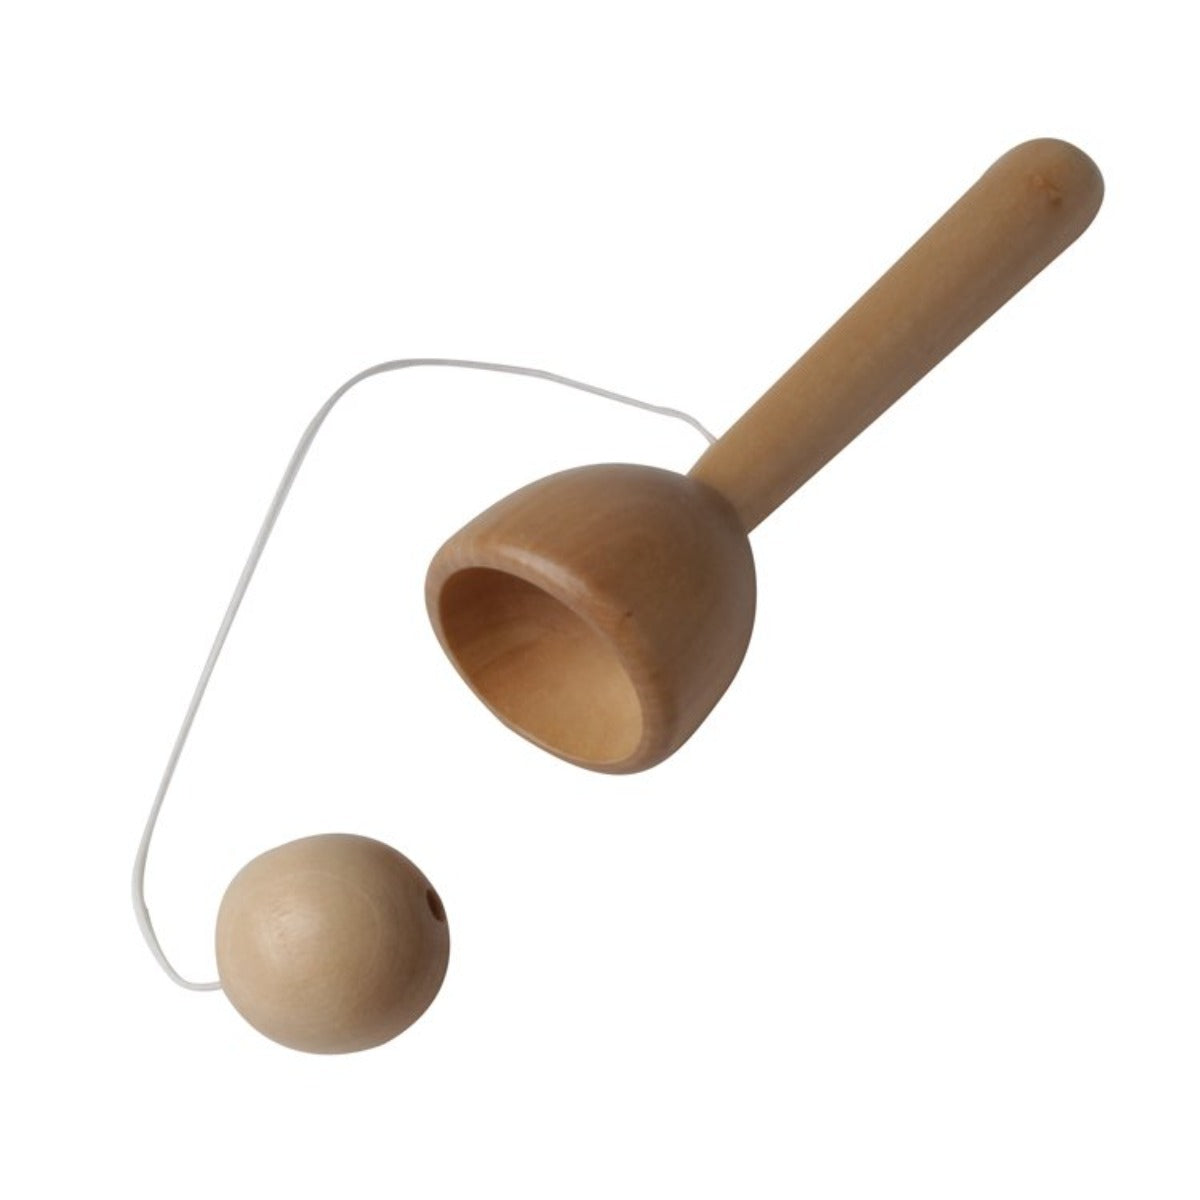 WOODEN CUP & BALL